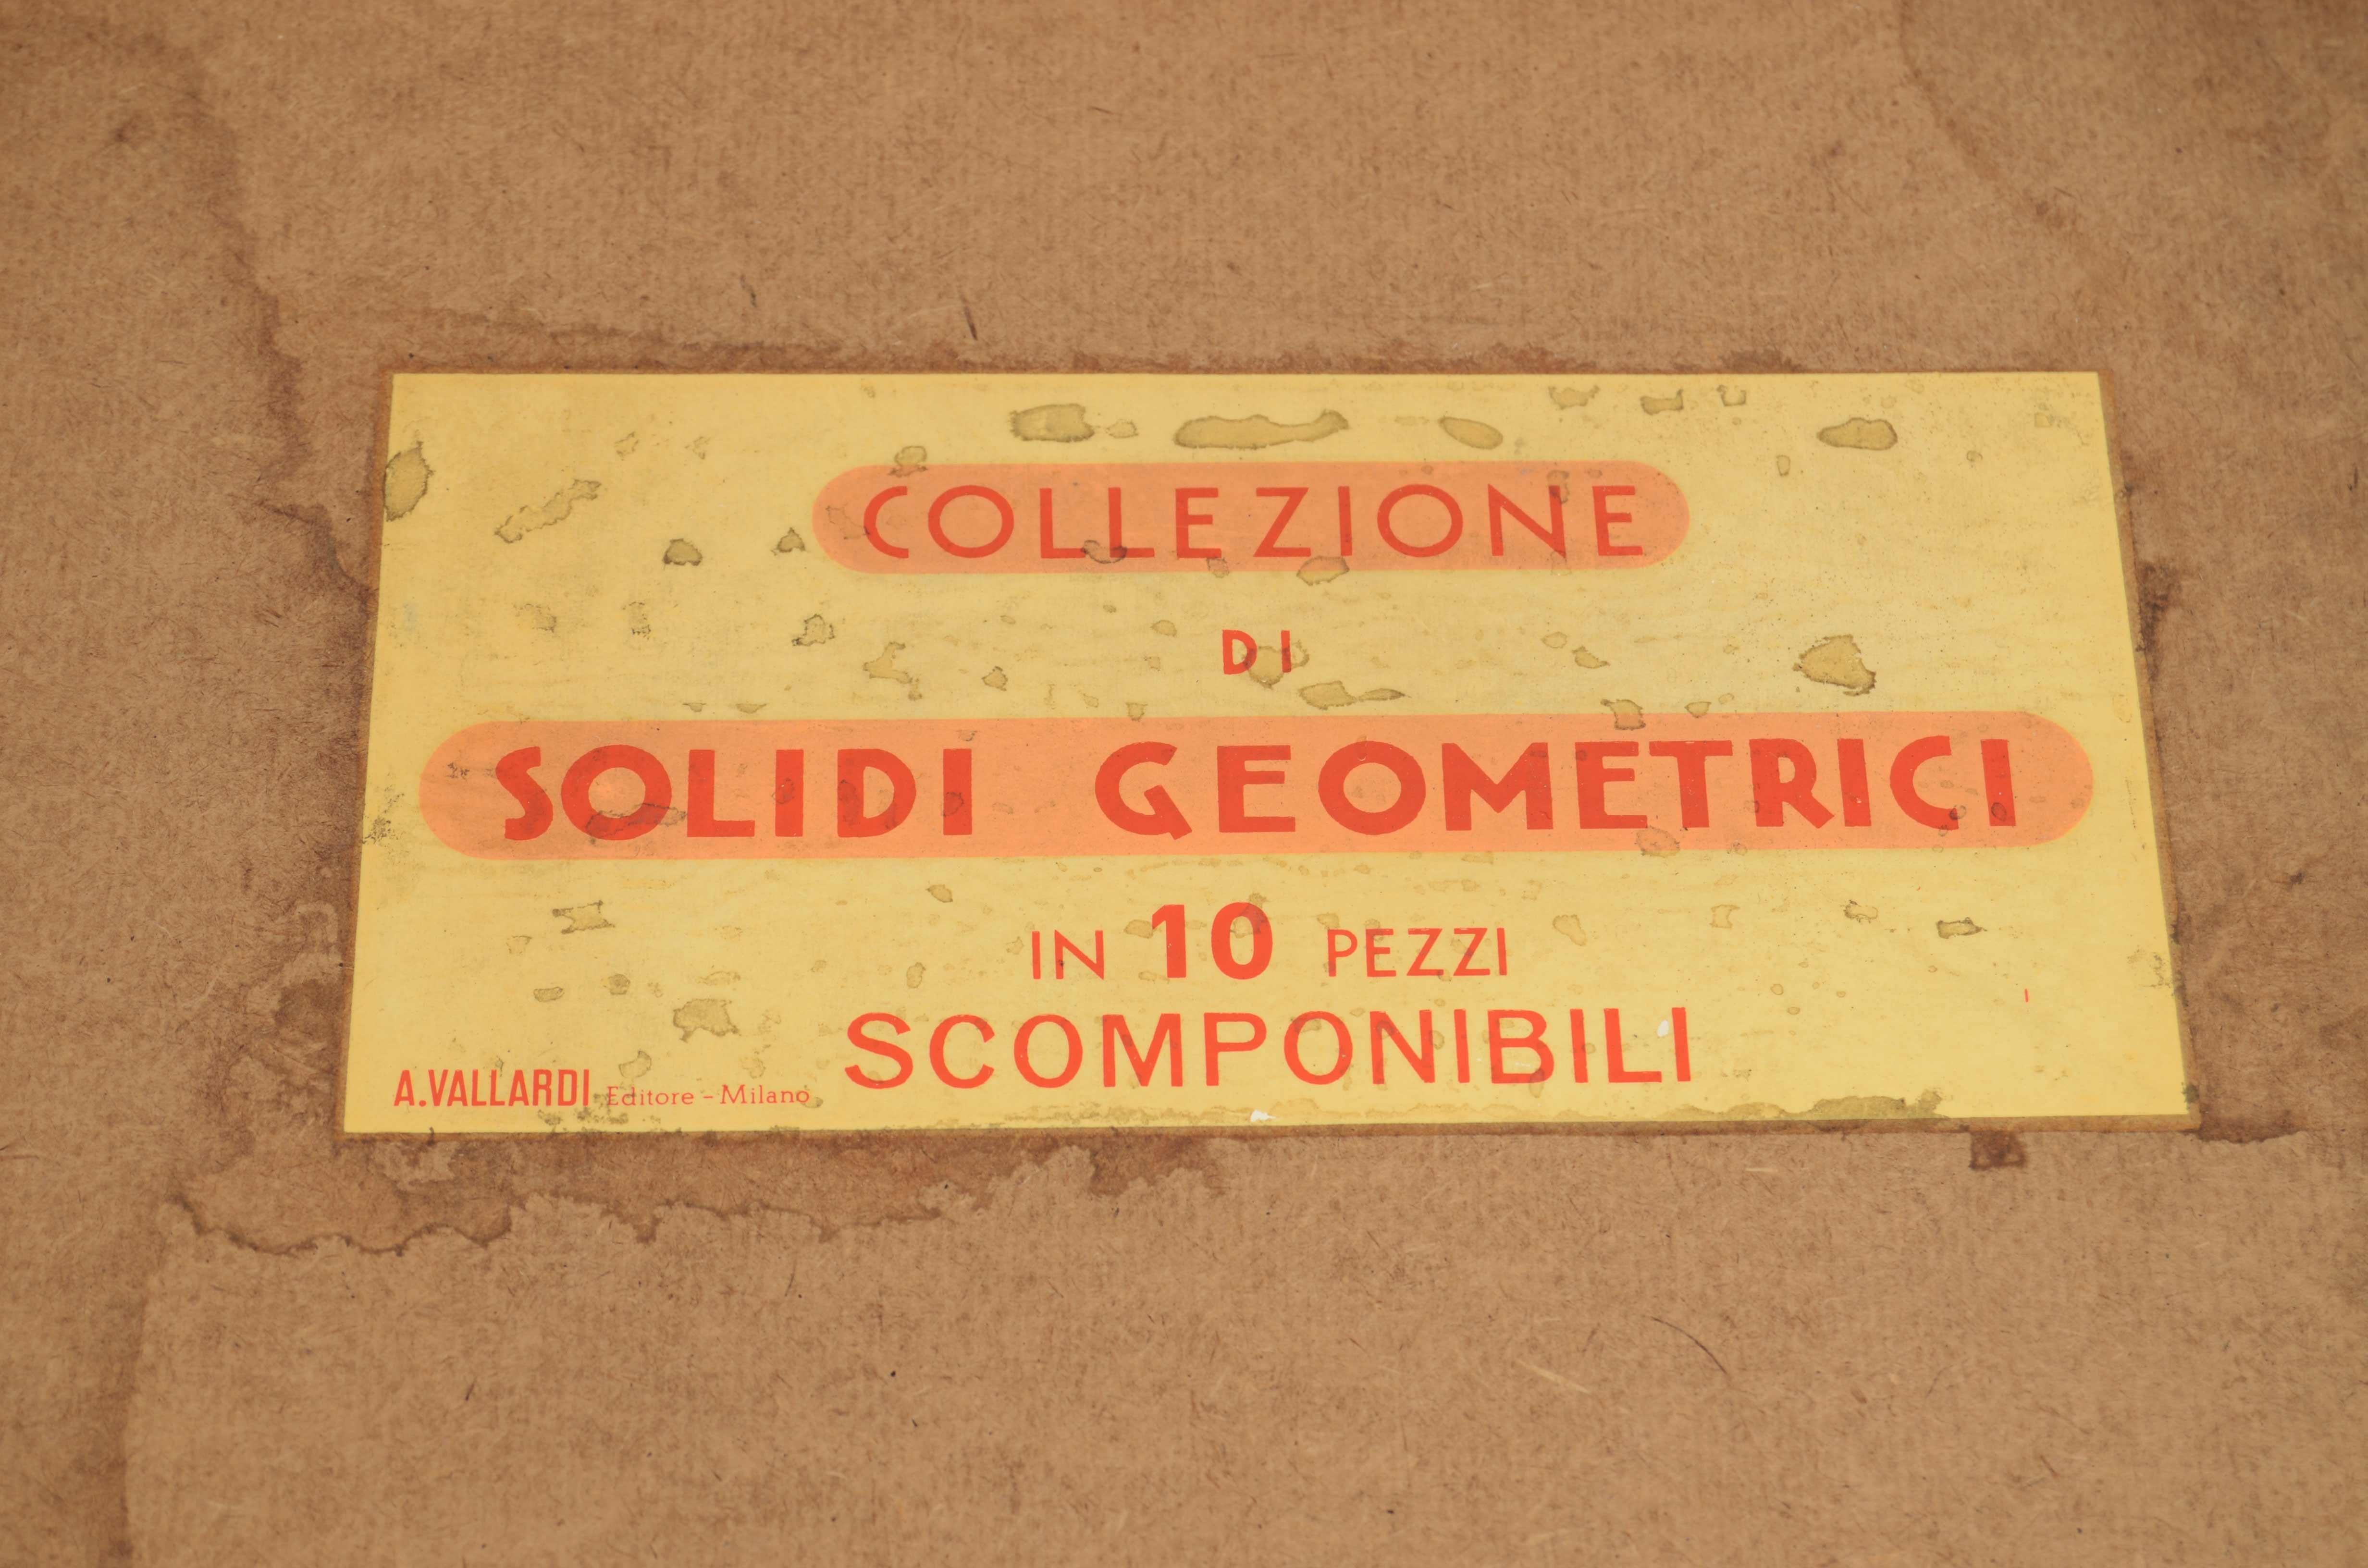 Box containing 10 removable geometric solids made of oak wood, maximum height 20 cm -inches 7.9, housed in their original wooden box. Made for educational purposes for schools by publisher Antonio Vallardi in the 1960s. Never used.
Box size cm